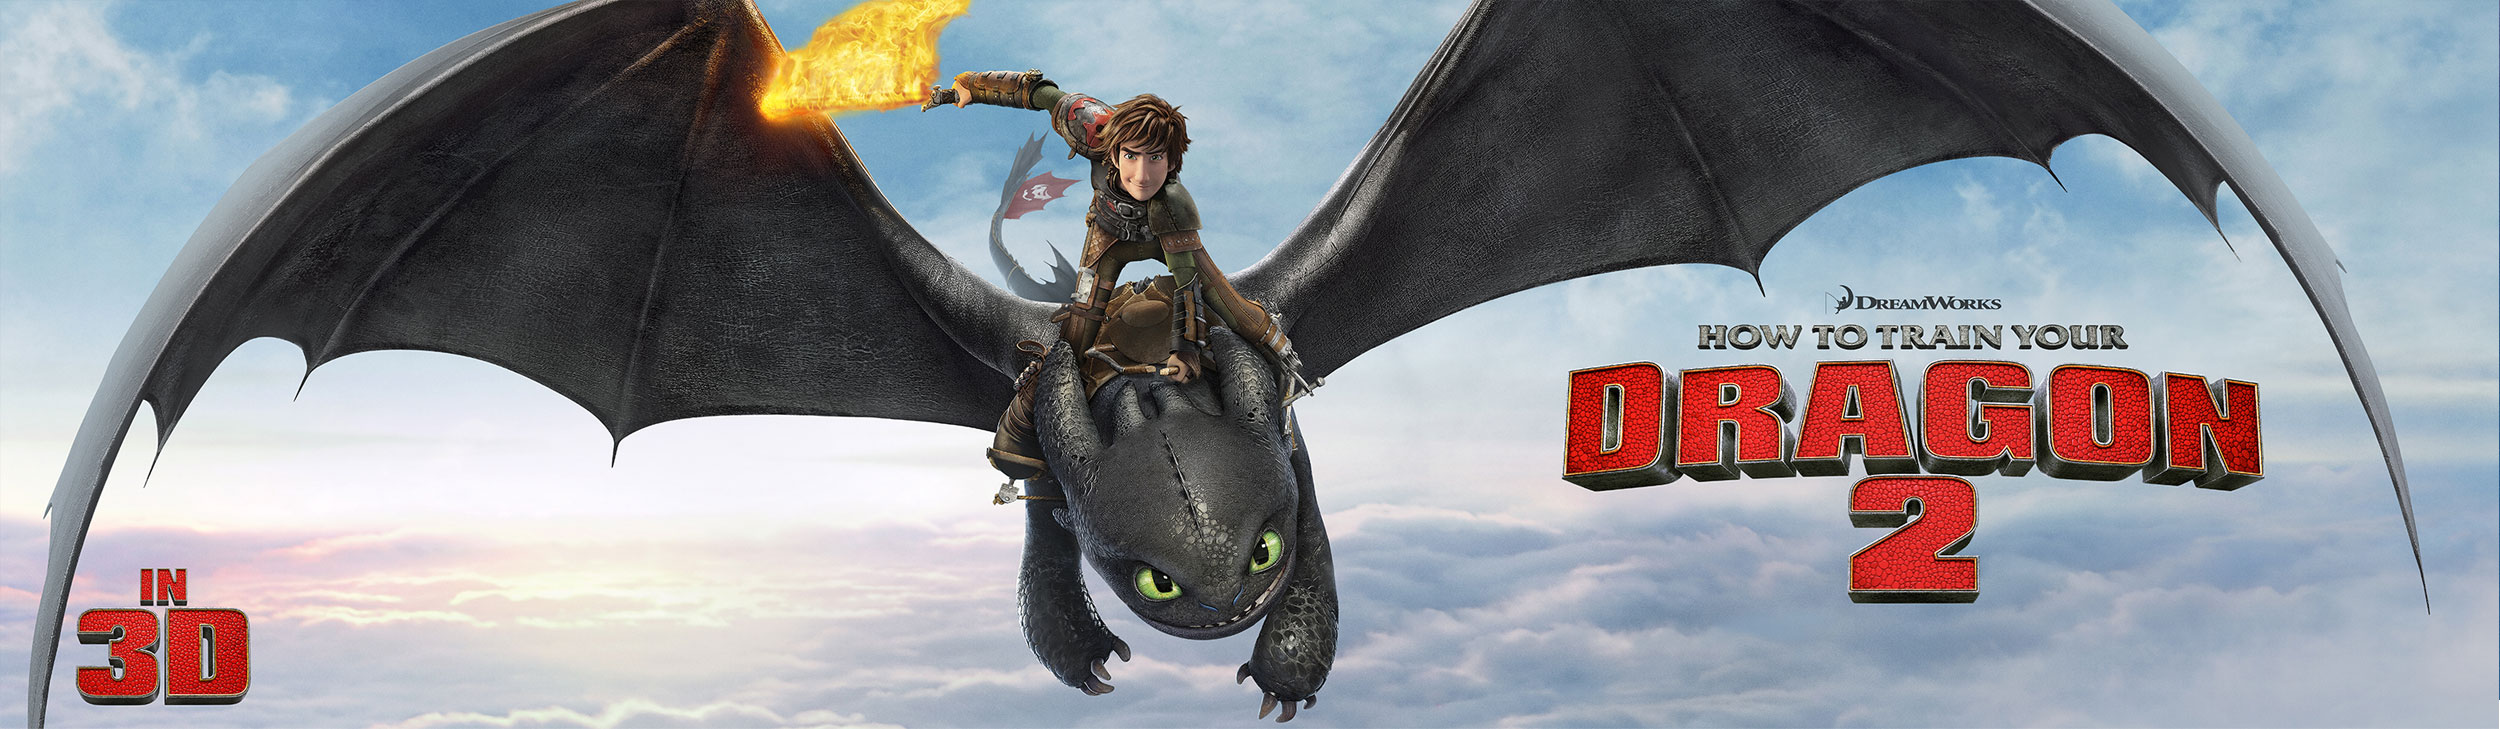 How to Train Your Dragon 2 Header IMG